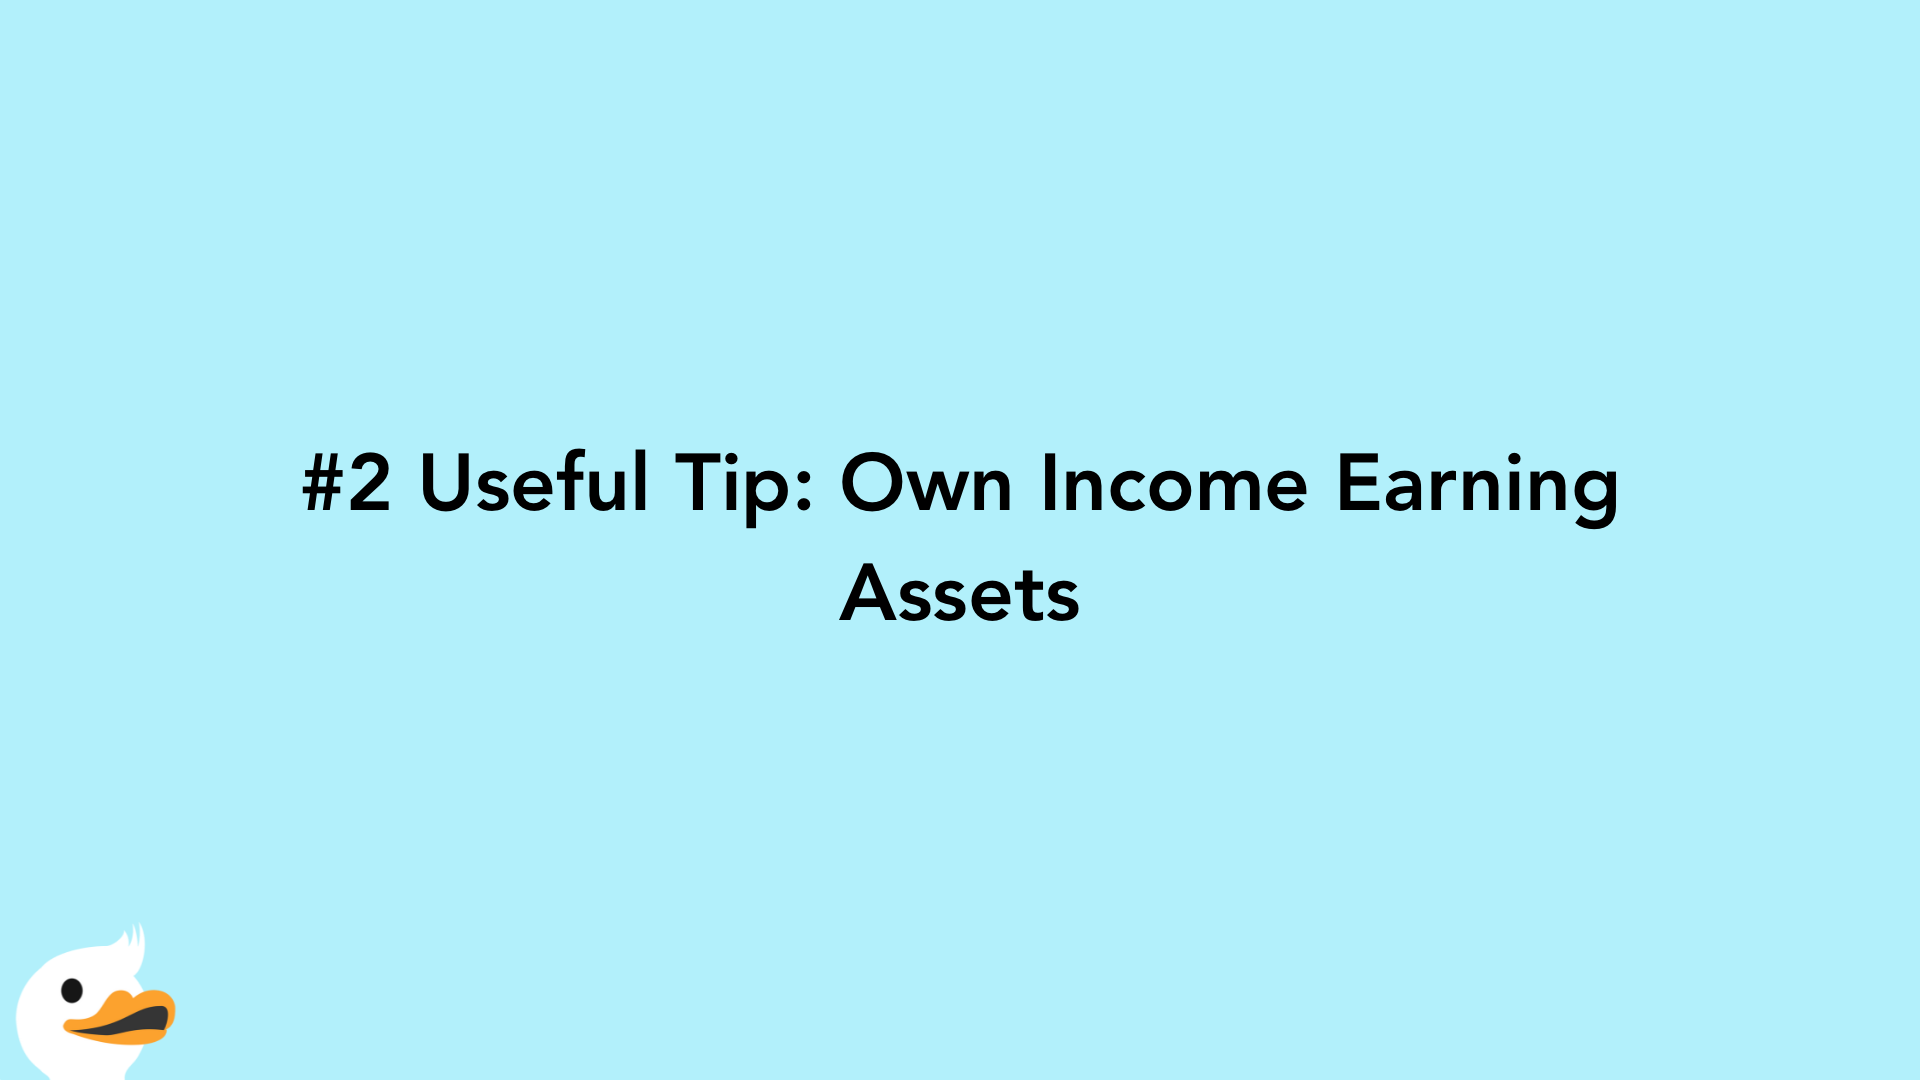 #2 Useful Tip: Own Income Earning Assets